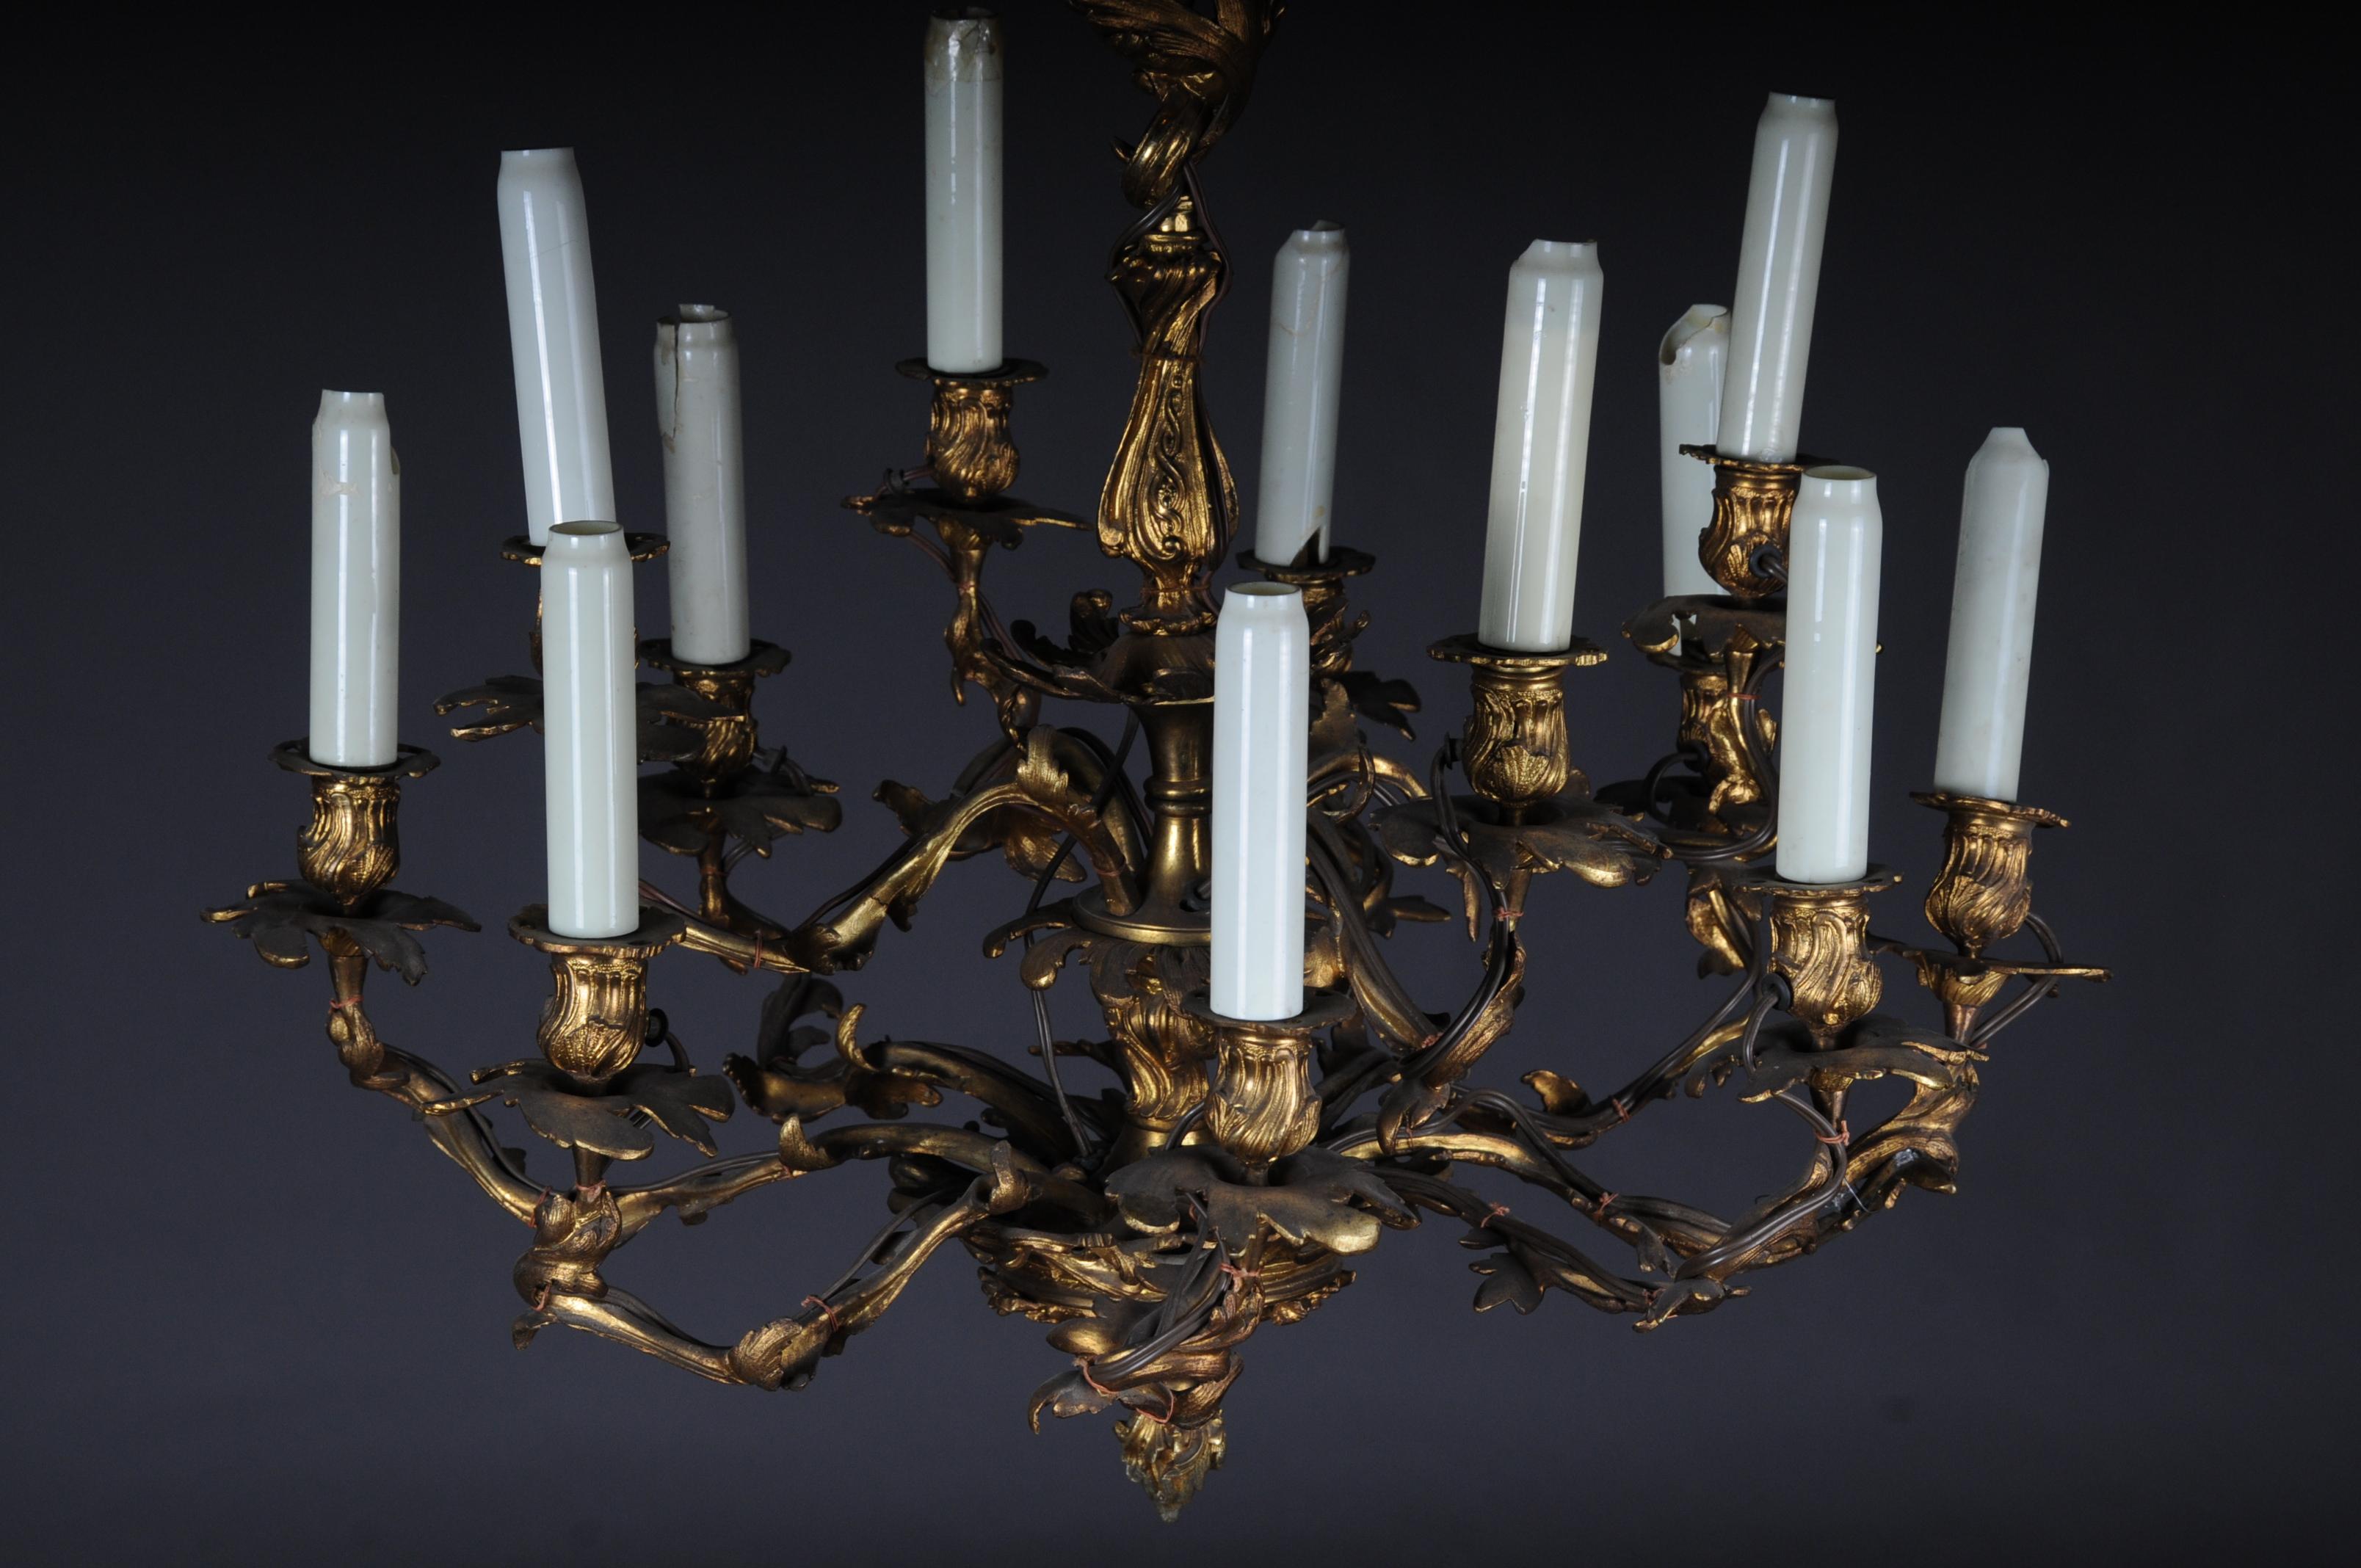 Antique Dresden Baroque chandelier, circa 1880.

Gilded bronze casting. Multiple curly arms. High, decorated shaft with 12 externally placed flames. Fontanienbekrönung. Candle-shaped pods.

(F - 88).